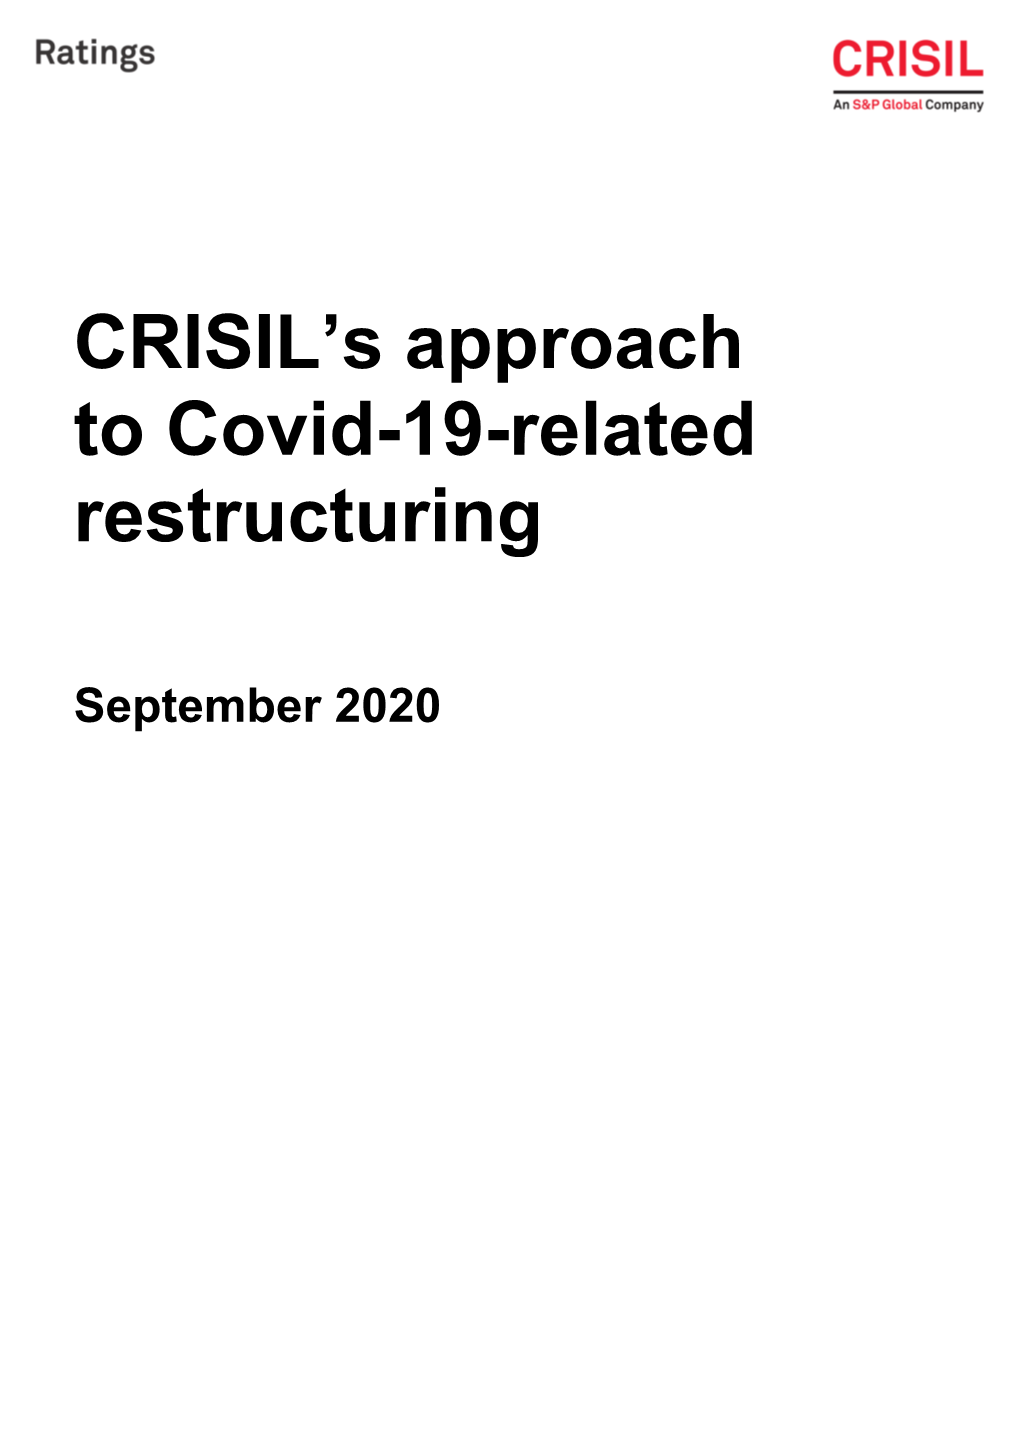 CRISIL's Approach to Covid-19-Related Restructuring